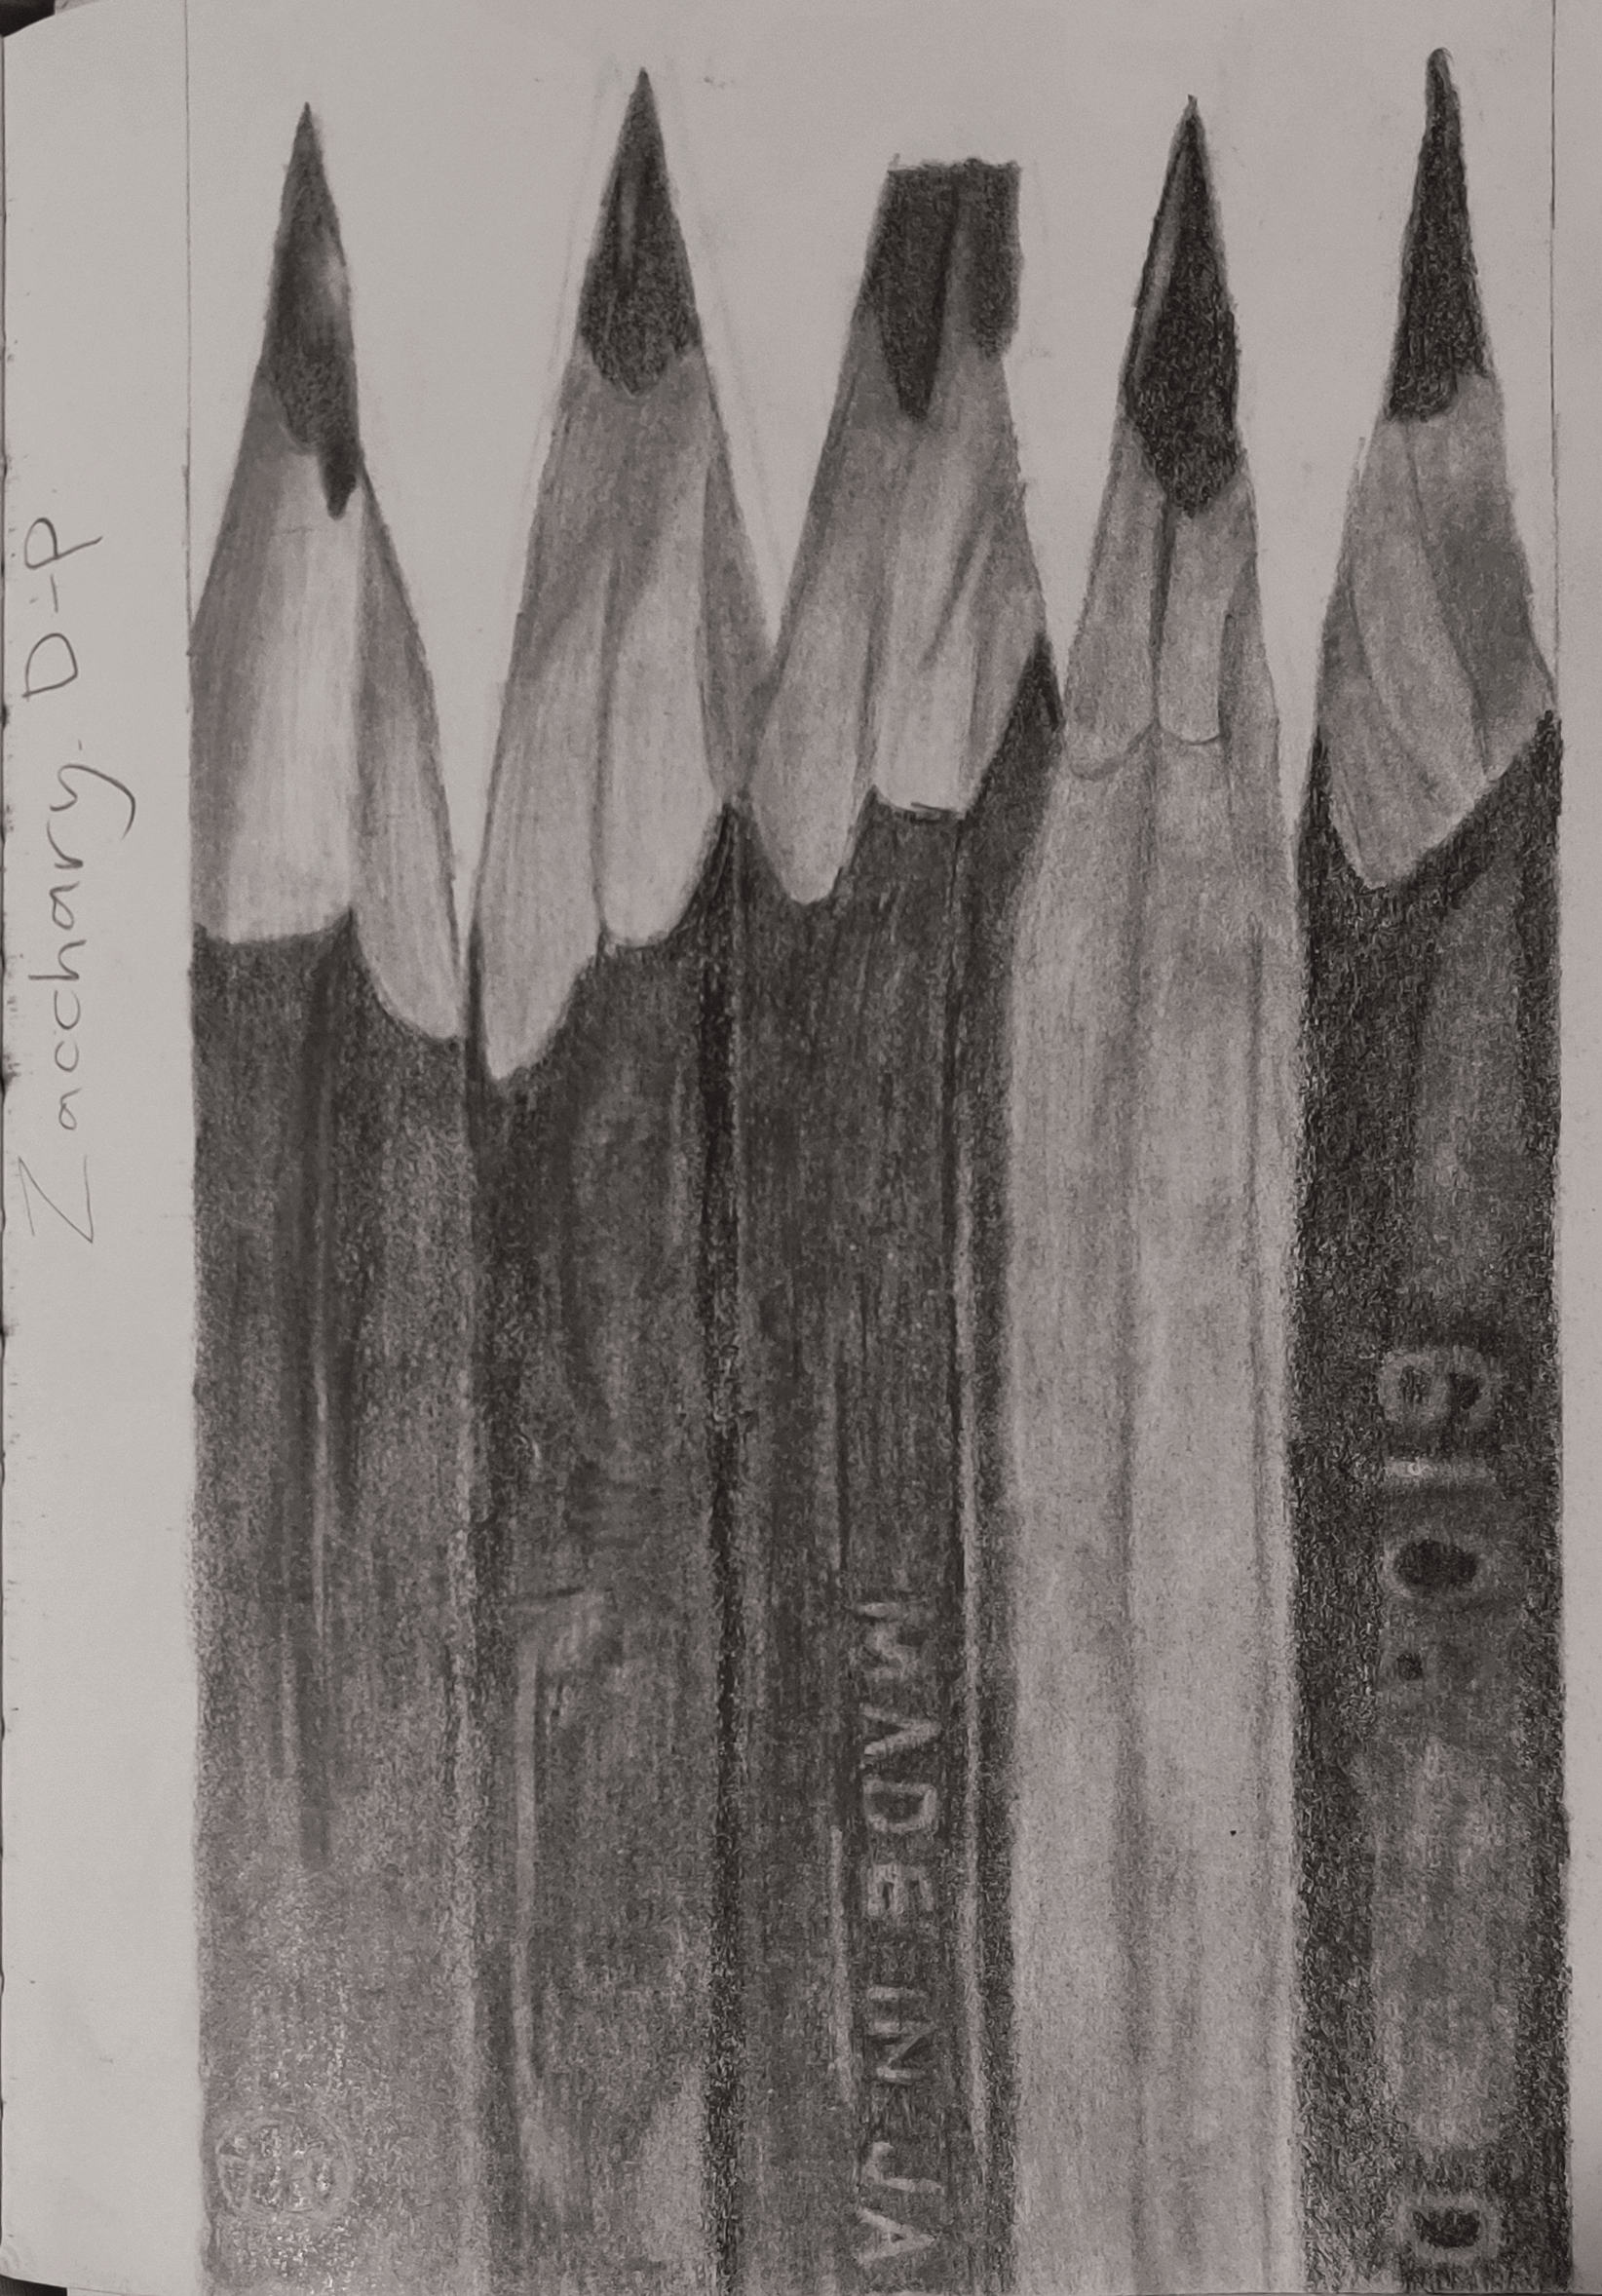 A drawing of 5 pencils side-by-side.